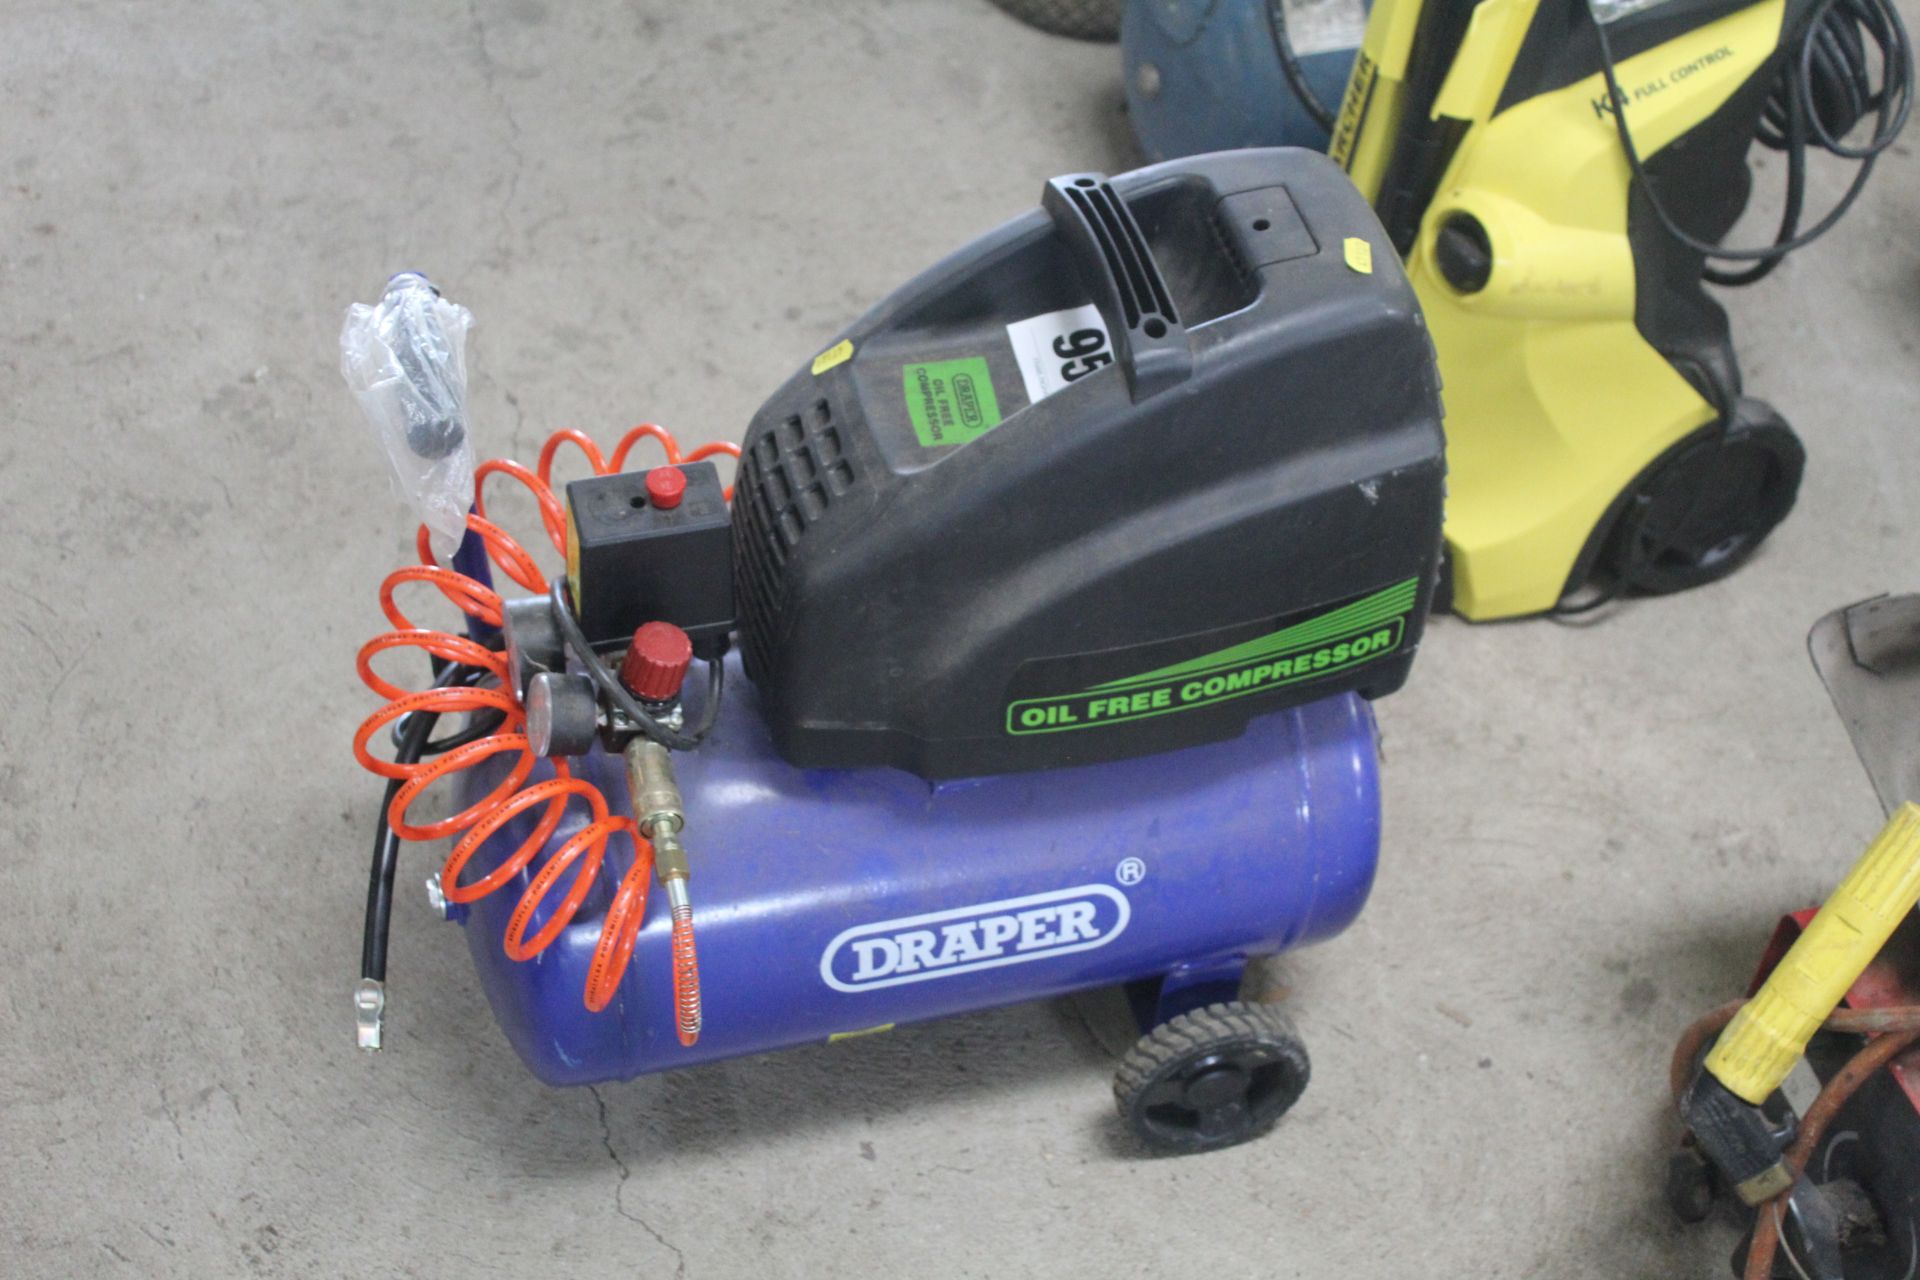 Draper compressor. With hose and inflation gun. - Image 2 of 3